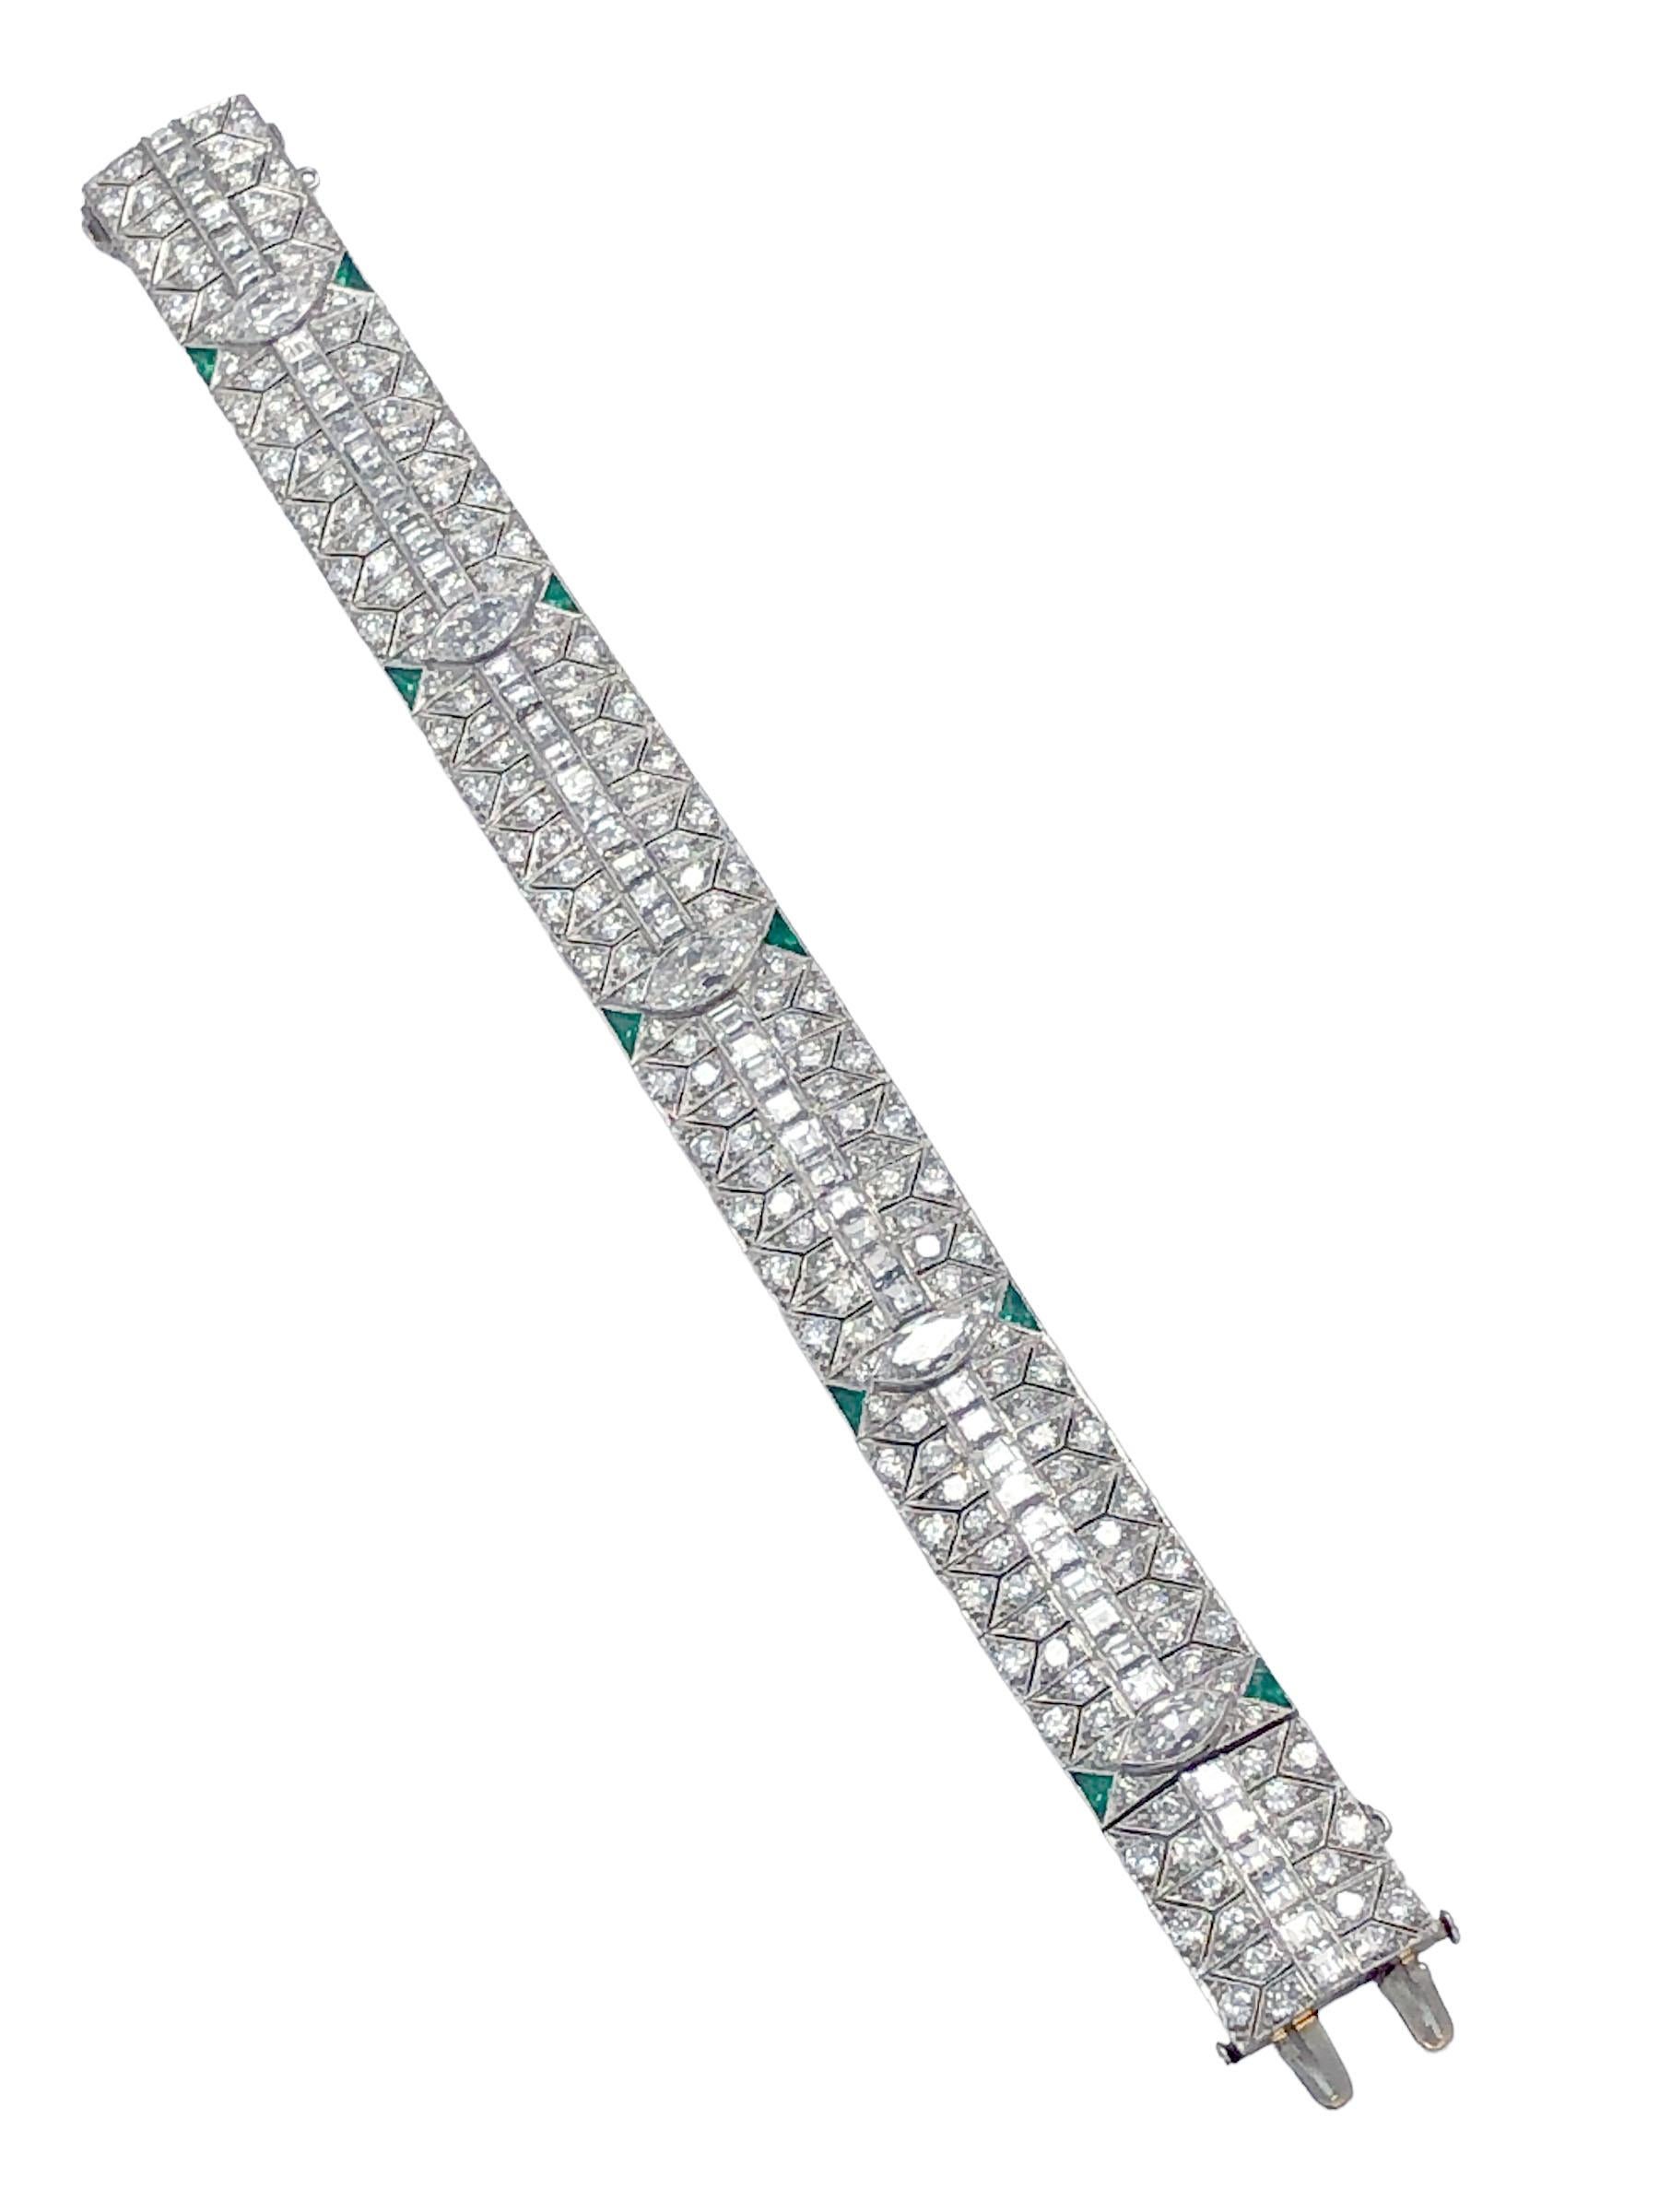 Circa 1930s Platinum True Art Deco design Bracelet, measuring 7 inches in length and 5/8 inch wide, set with Marquise shape Diamonds the largest being approximately 1 carat and the others approximately 3/4 carat each, a center row of Square, Step